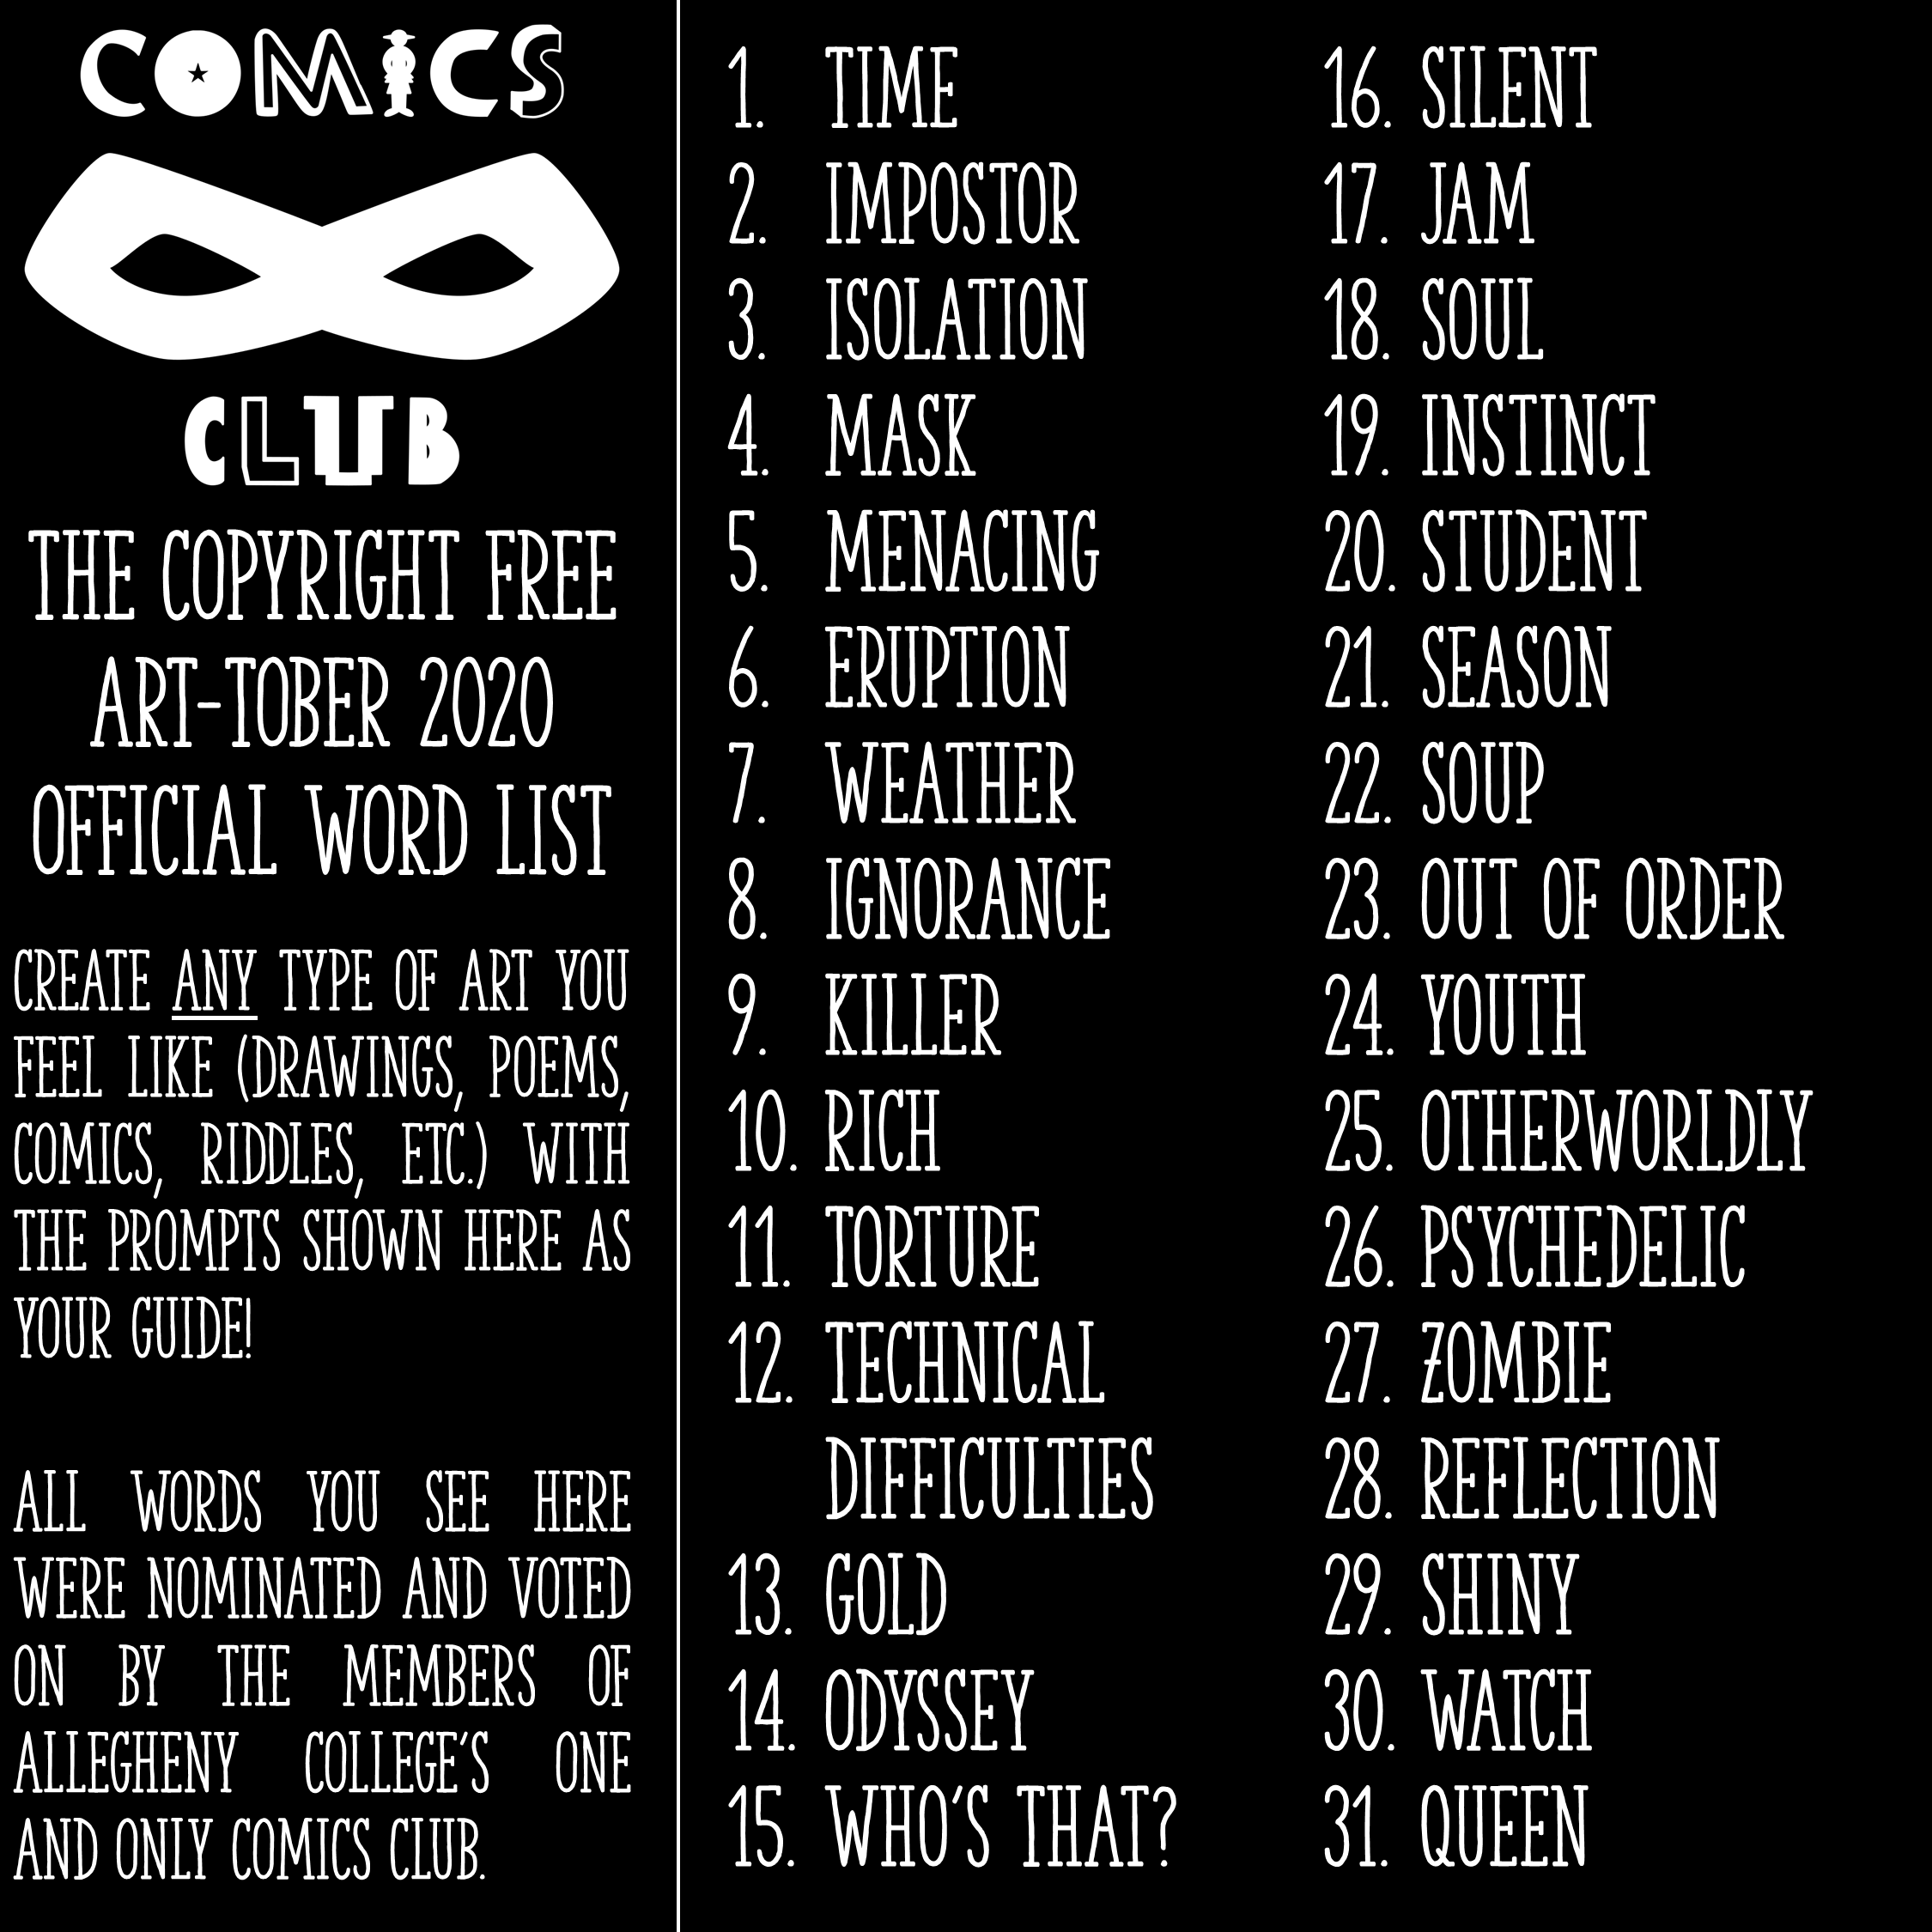 A poster with the 2020 logo for Allegheny College's Comics Club alongside a description of the Art-tober event and a list of the 31 prompts.